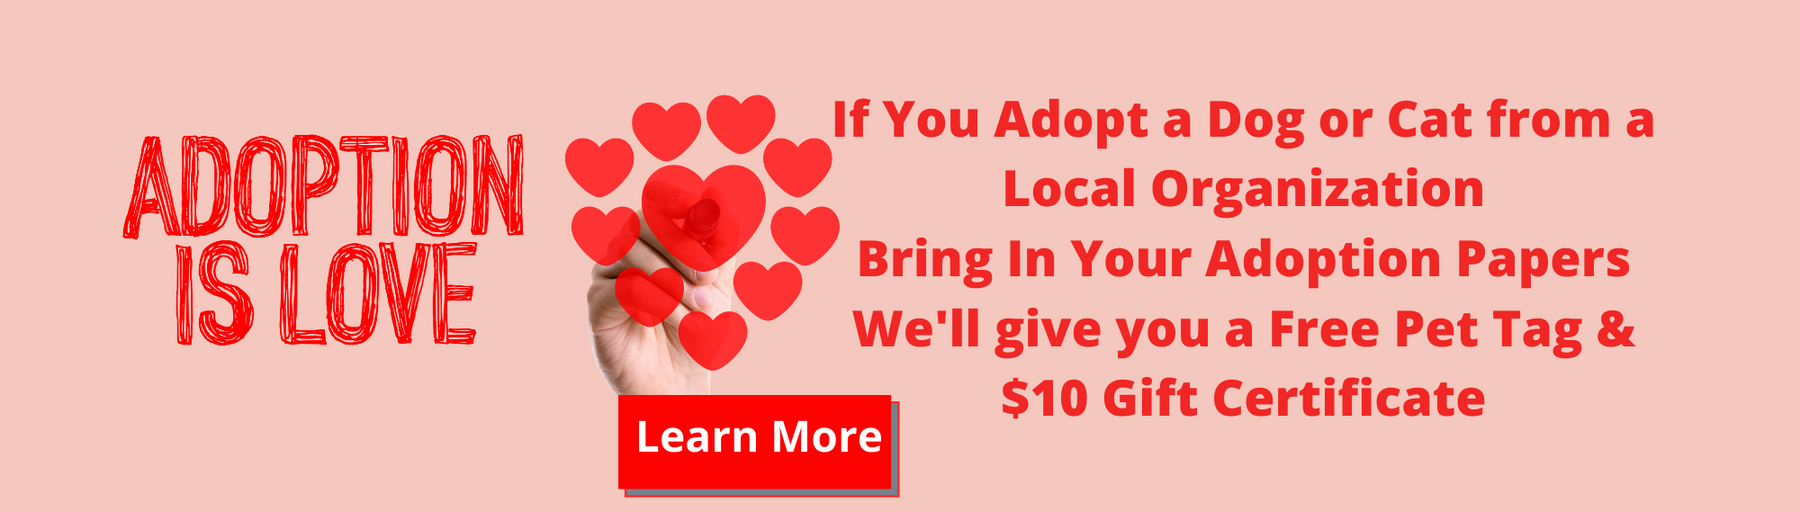 
        
          Jake's is proud to support and recommend many of the local rescue groups and shelters in Palm Beach County. Among them are Danny & Ron's Rescue, Big Dog Ranch Rescue, Kibblez of Love, Amber's Animal Outreach, Justin Bartlett Animal Rescue, Palm Beach Shel
        
      